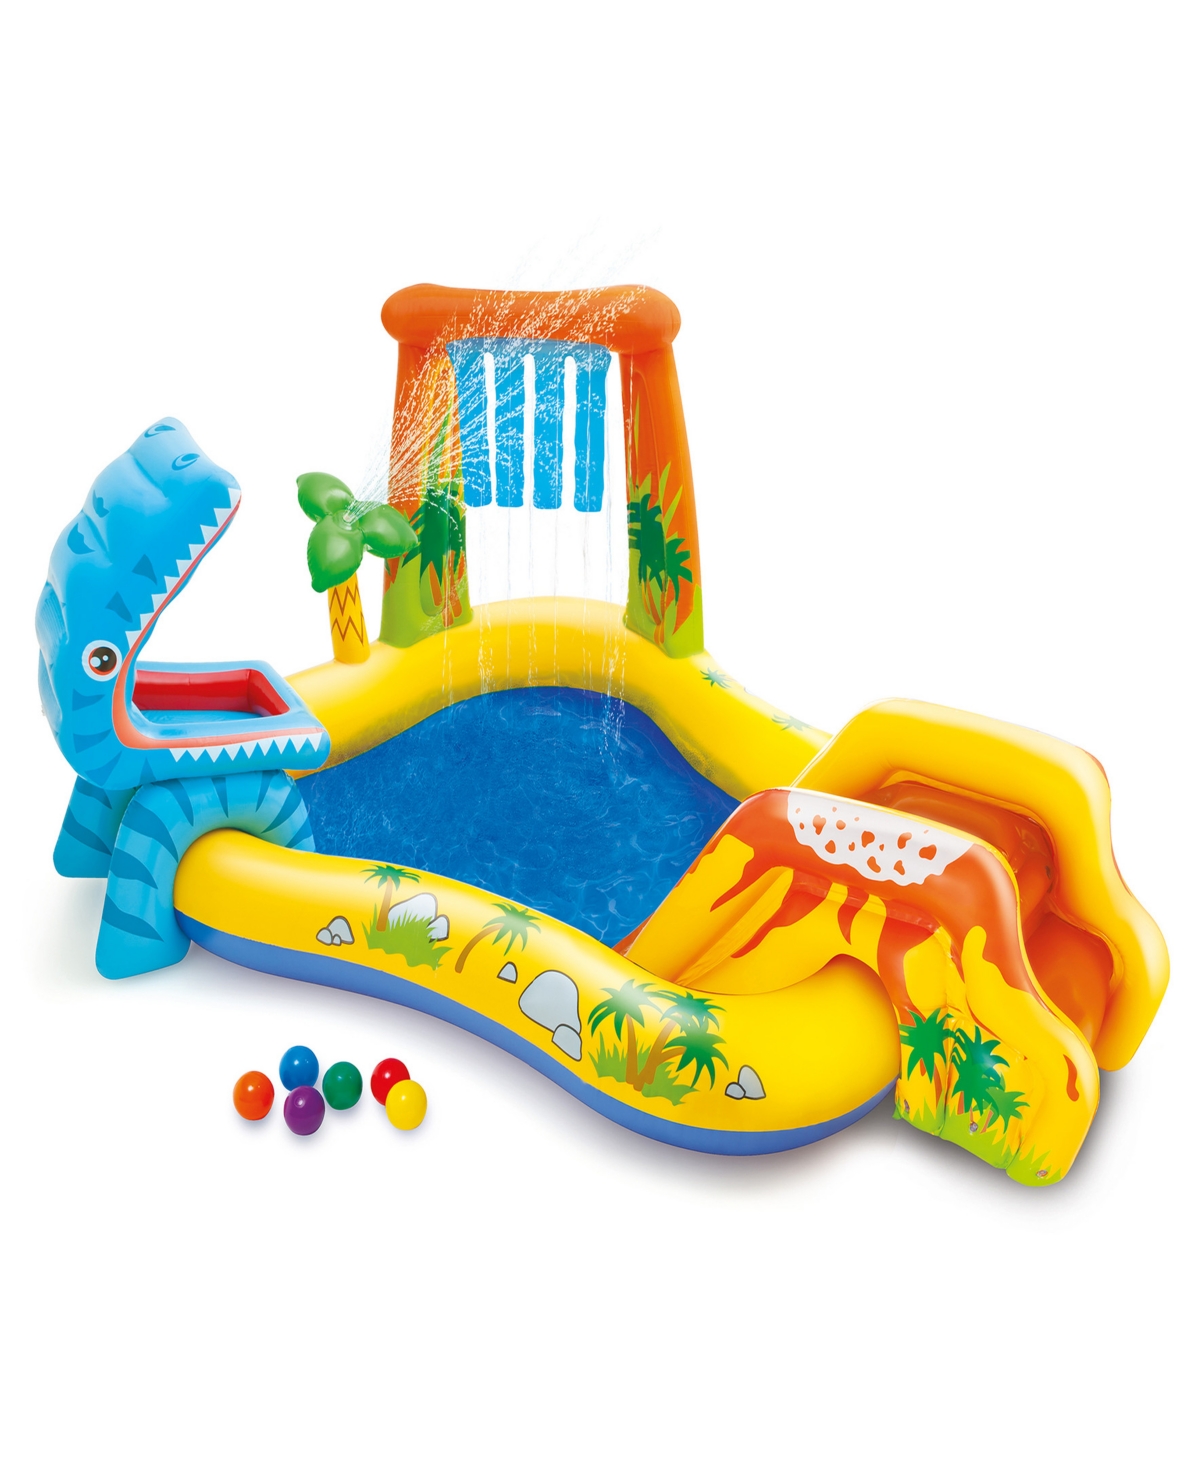 Intex Babies' Dinosaur Inflatable Play Center In Multi